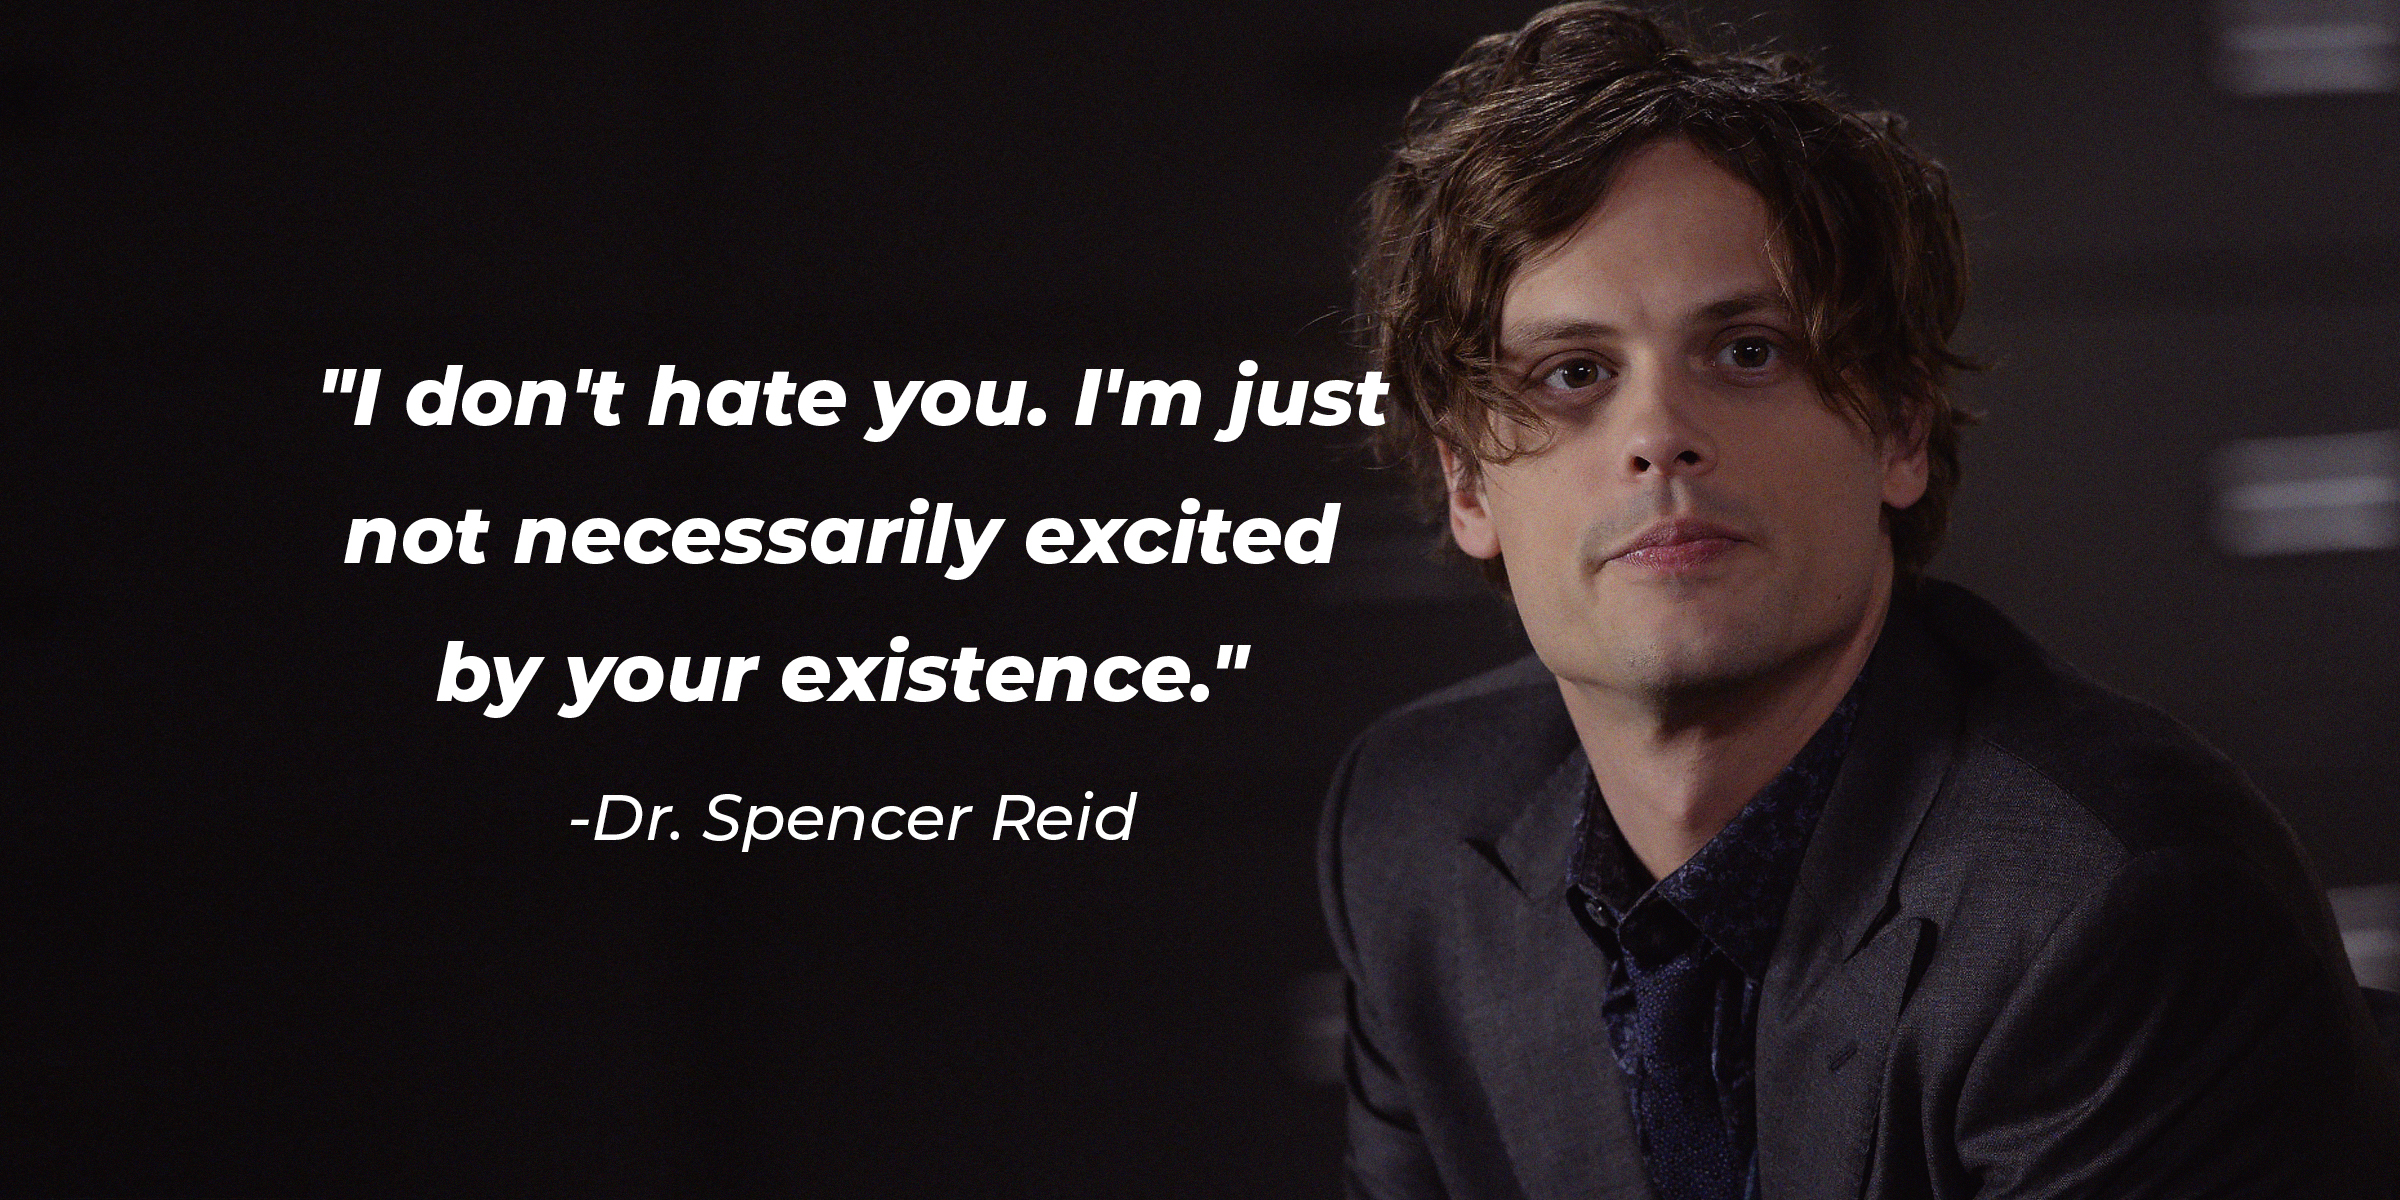 Photo of Dr. Spencer Reid with the quote: "I don't hate you. I'm just not necessarily excited by your existence." | Source: Getty Images